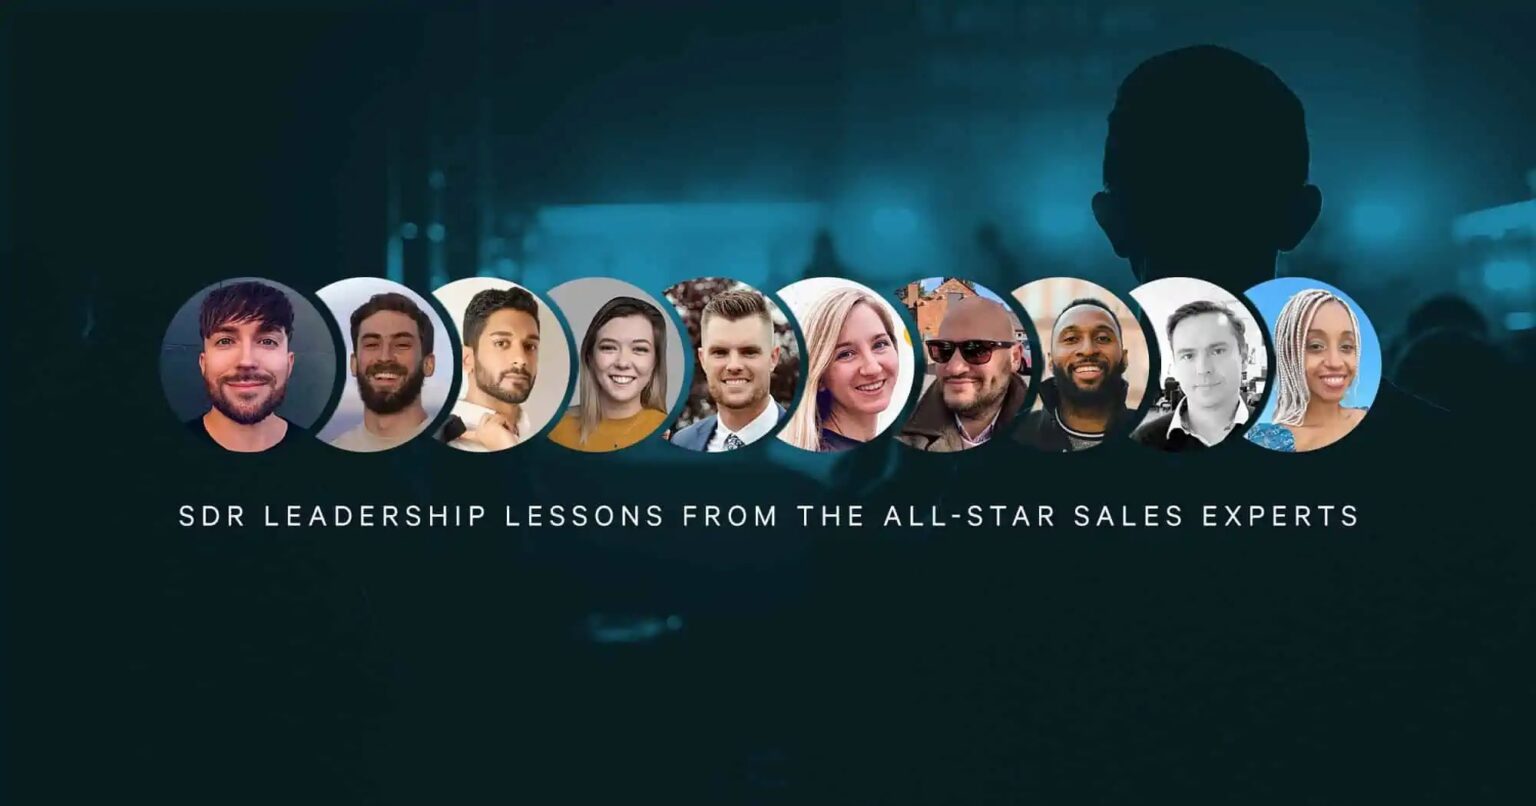 SDR Leadership Lessons from the All-Star Sales Experts